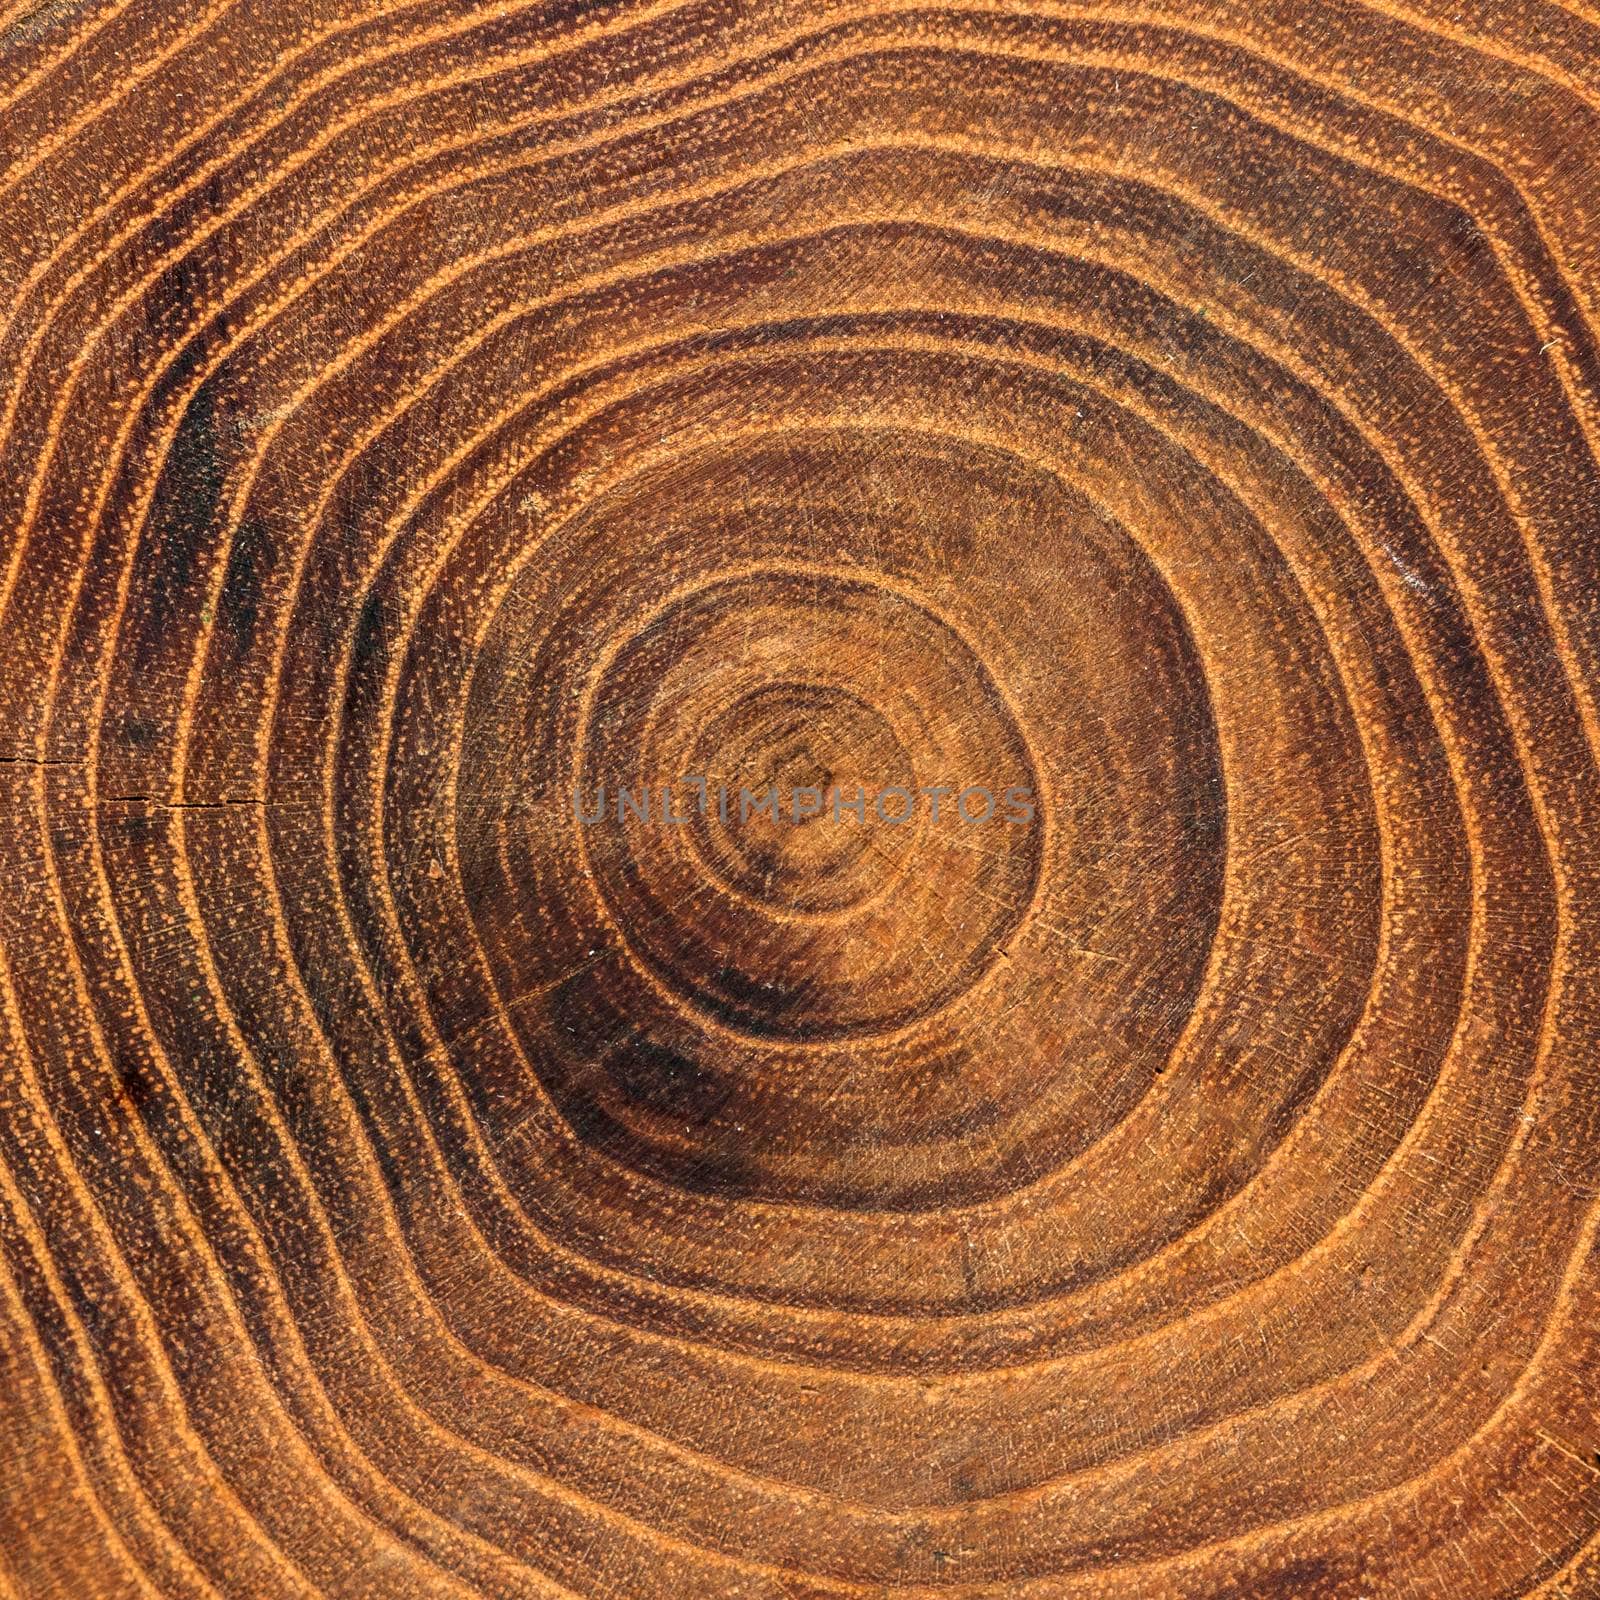 close up wooden annual growth rings. High resolution photo